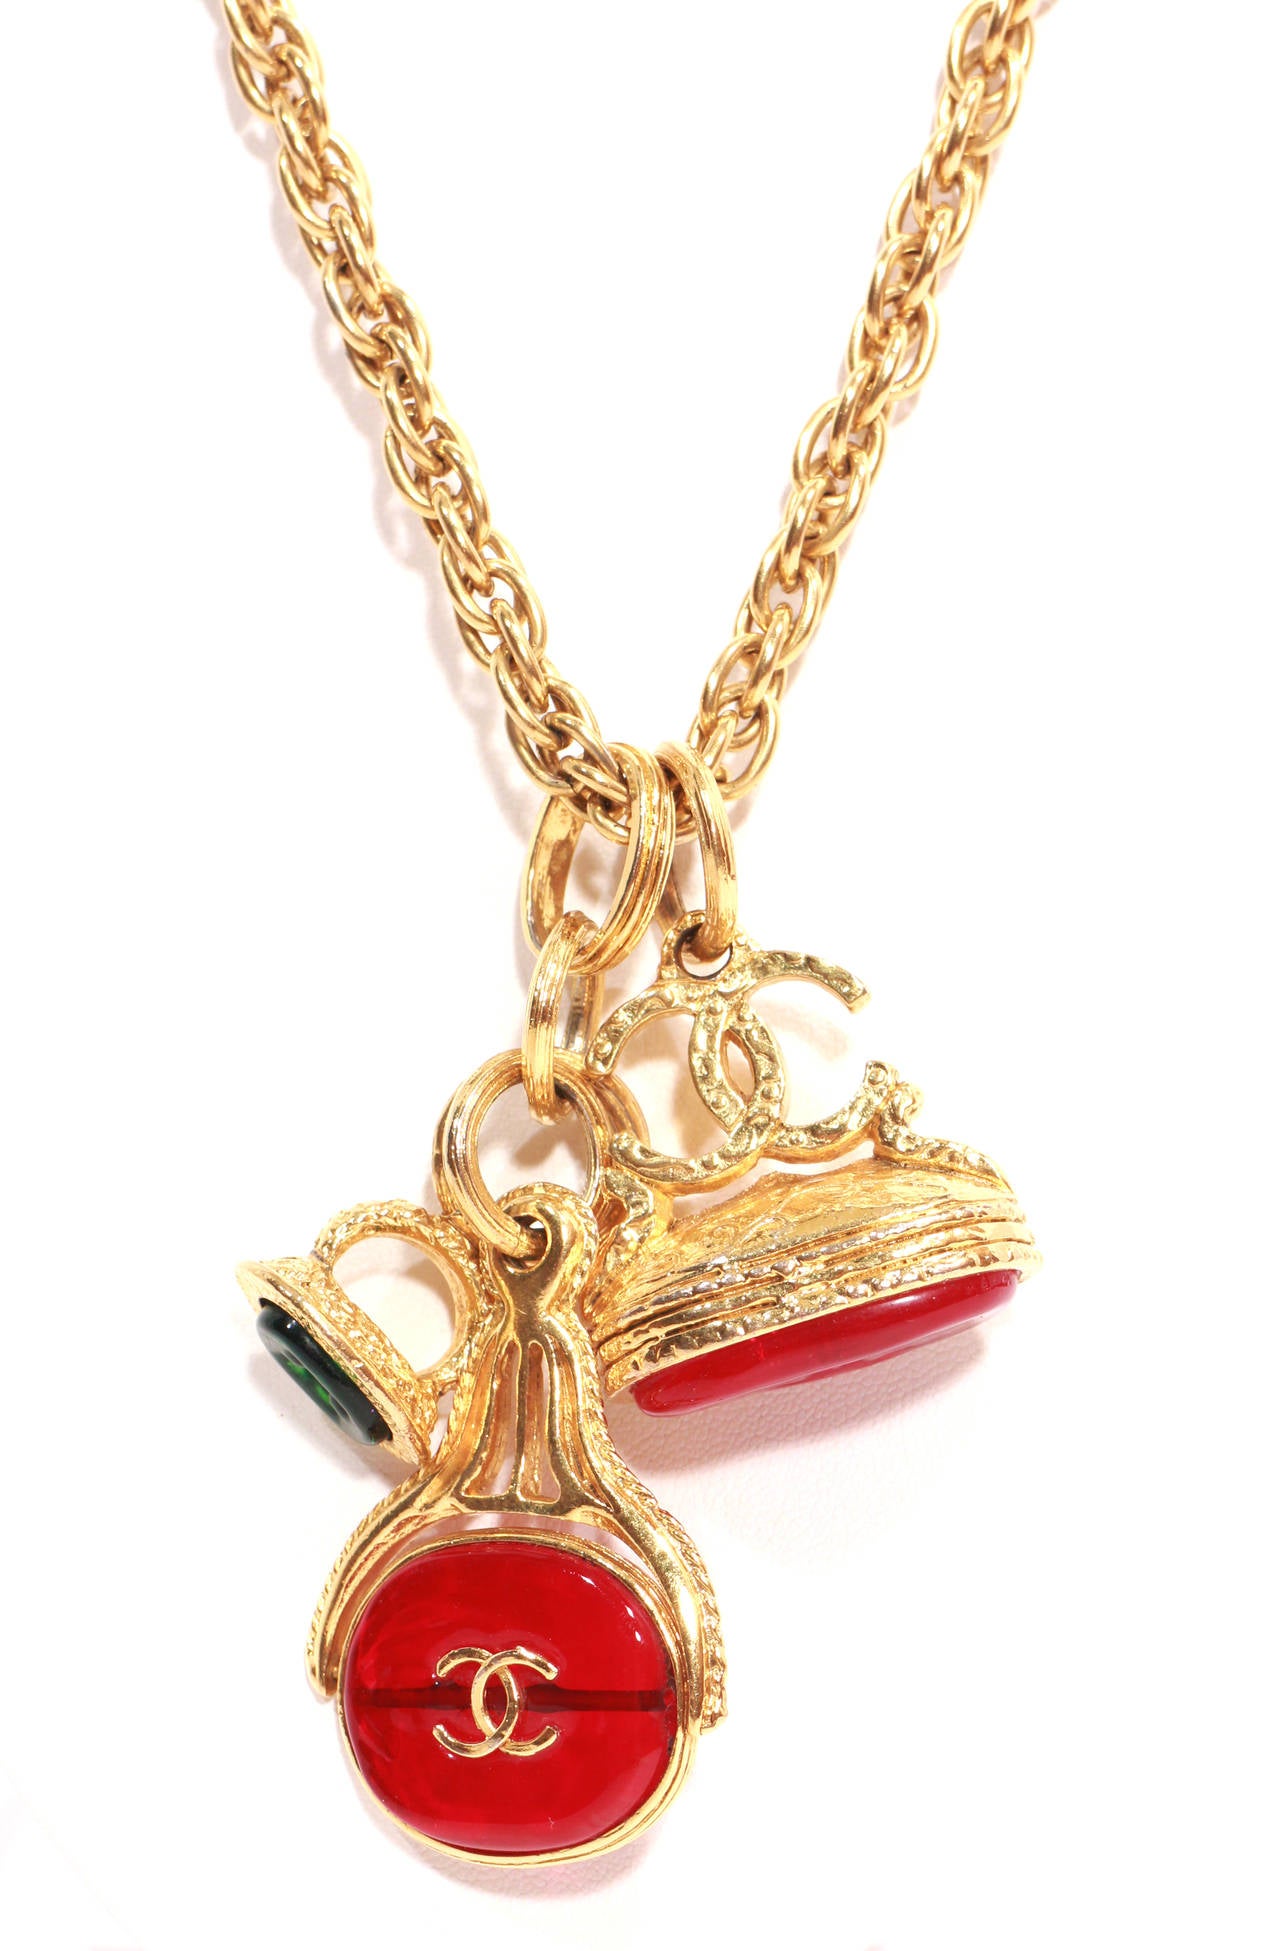 Chanel gold tone long chain necklace with three gripoix charms, red and green.

Excellent condition. Stamped. Pre owned by Regine Zylberberg